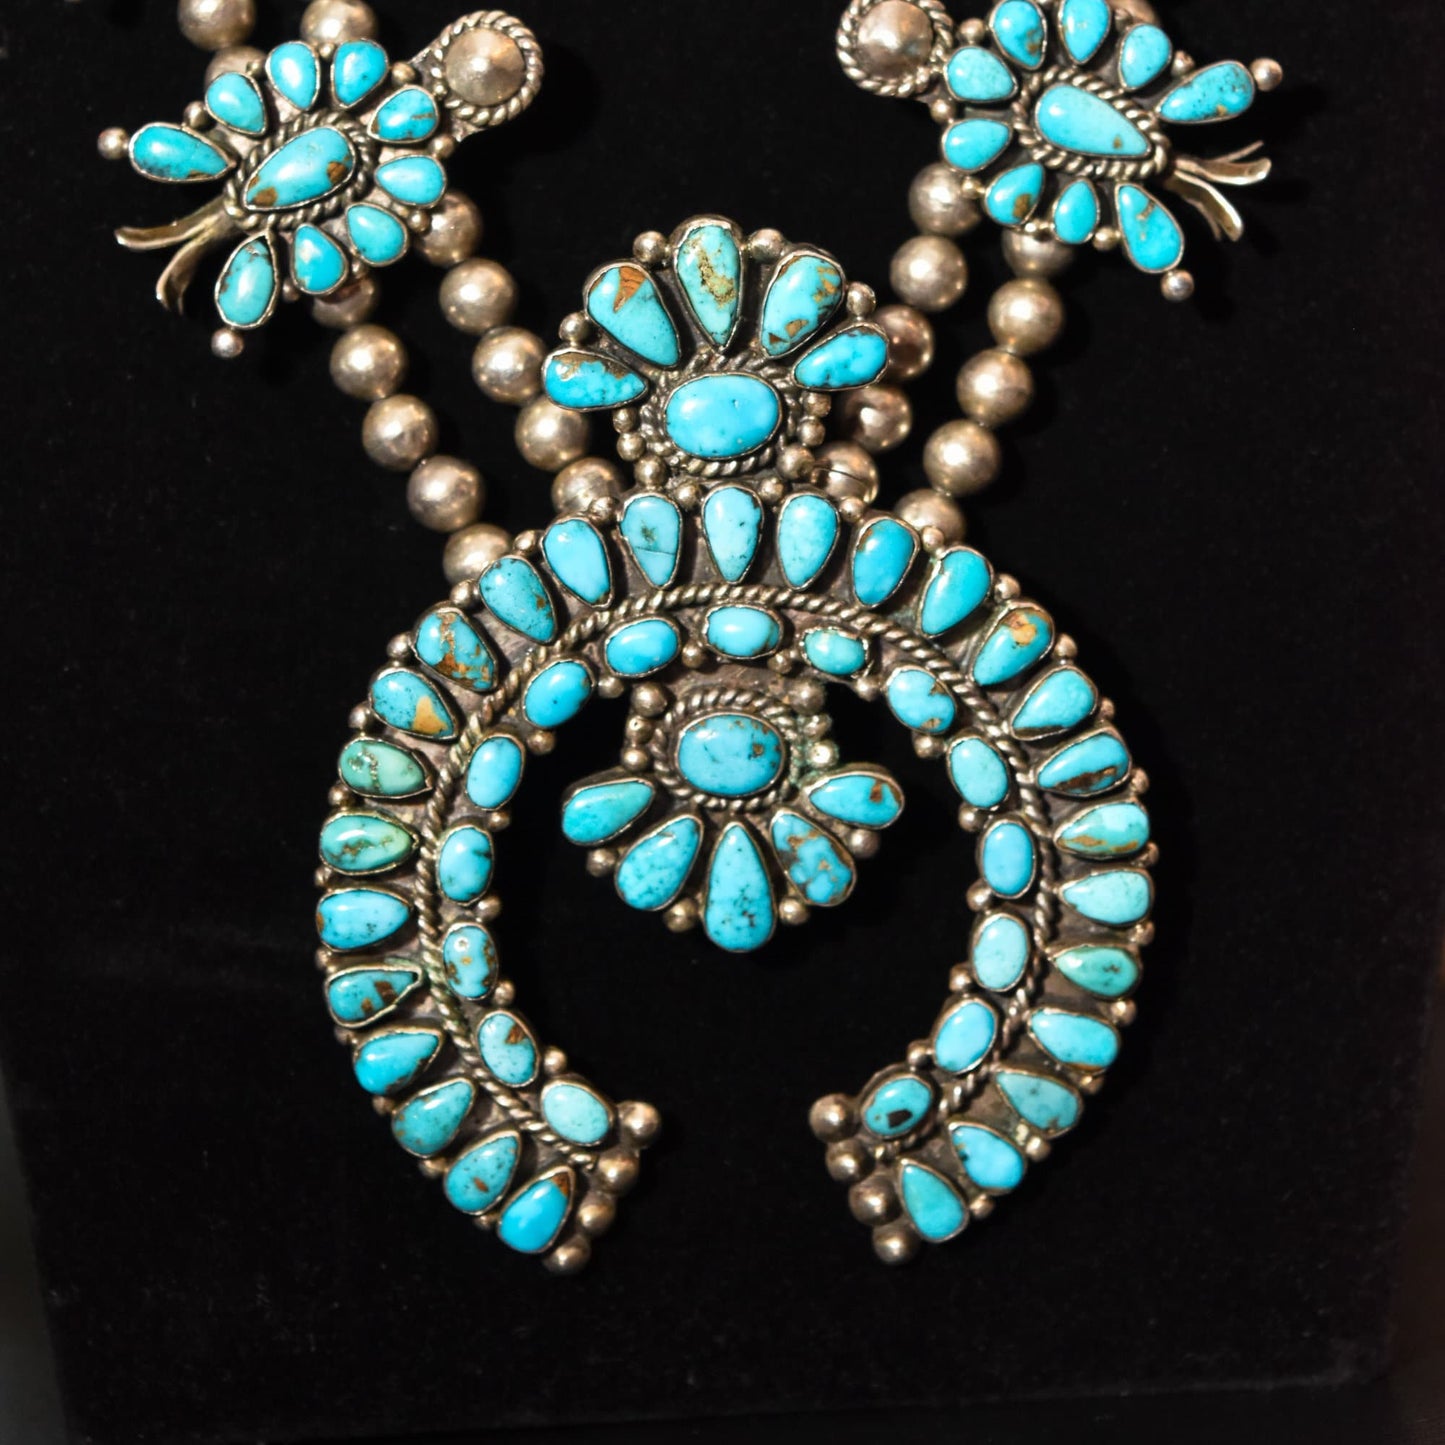 Native American Squash Blossom Necklace, Unsigned, Sterling Silver and Natural Turquoise, Old Pawn Jewelry, 32"